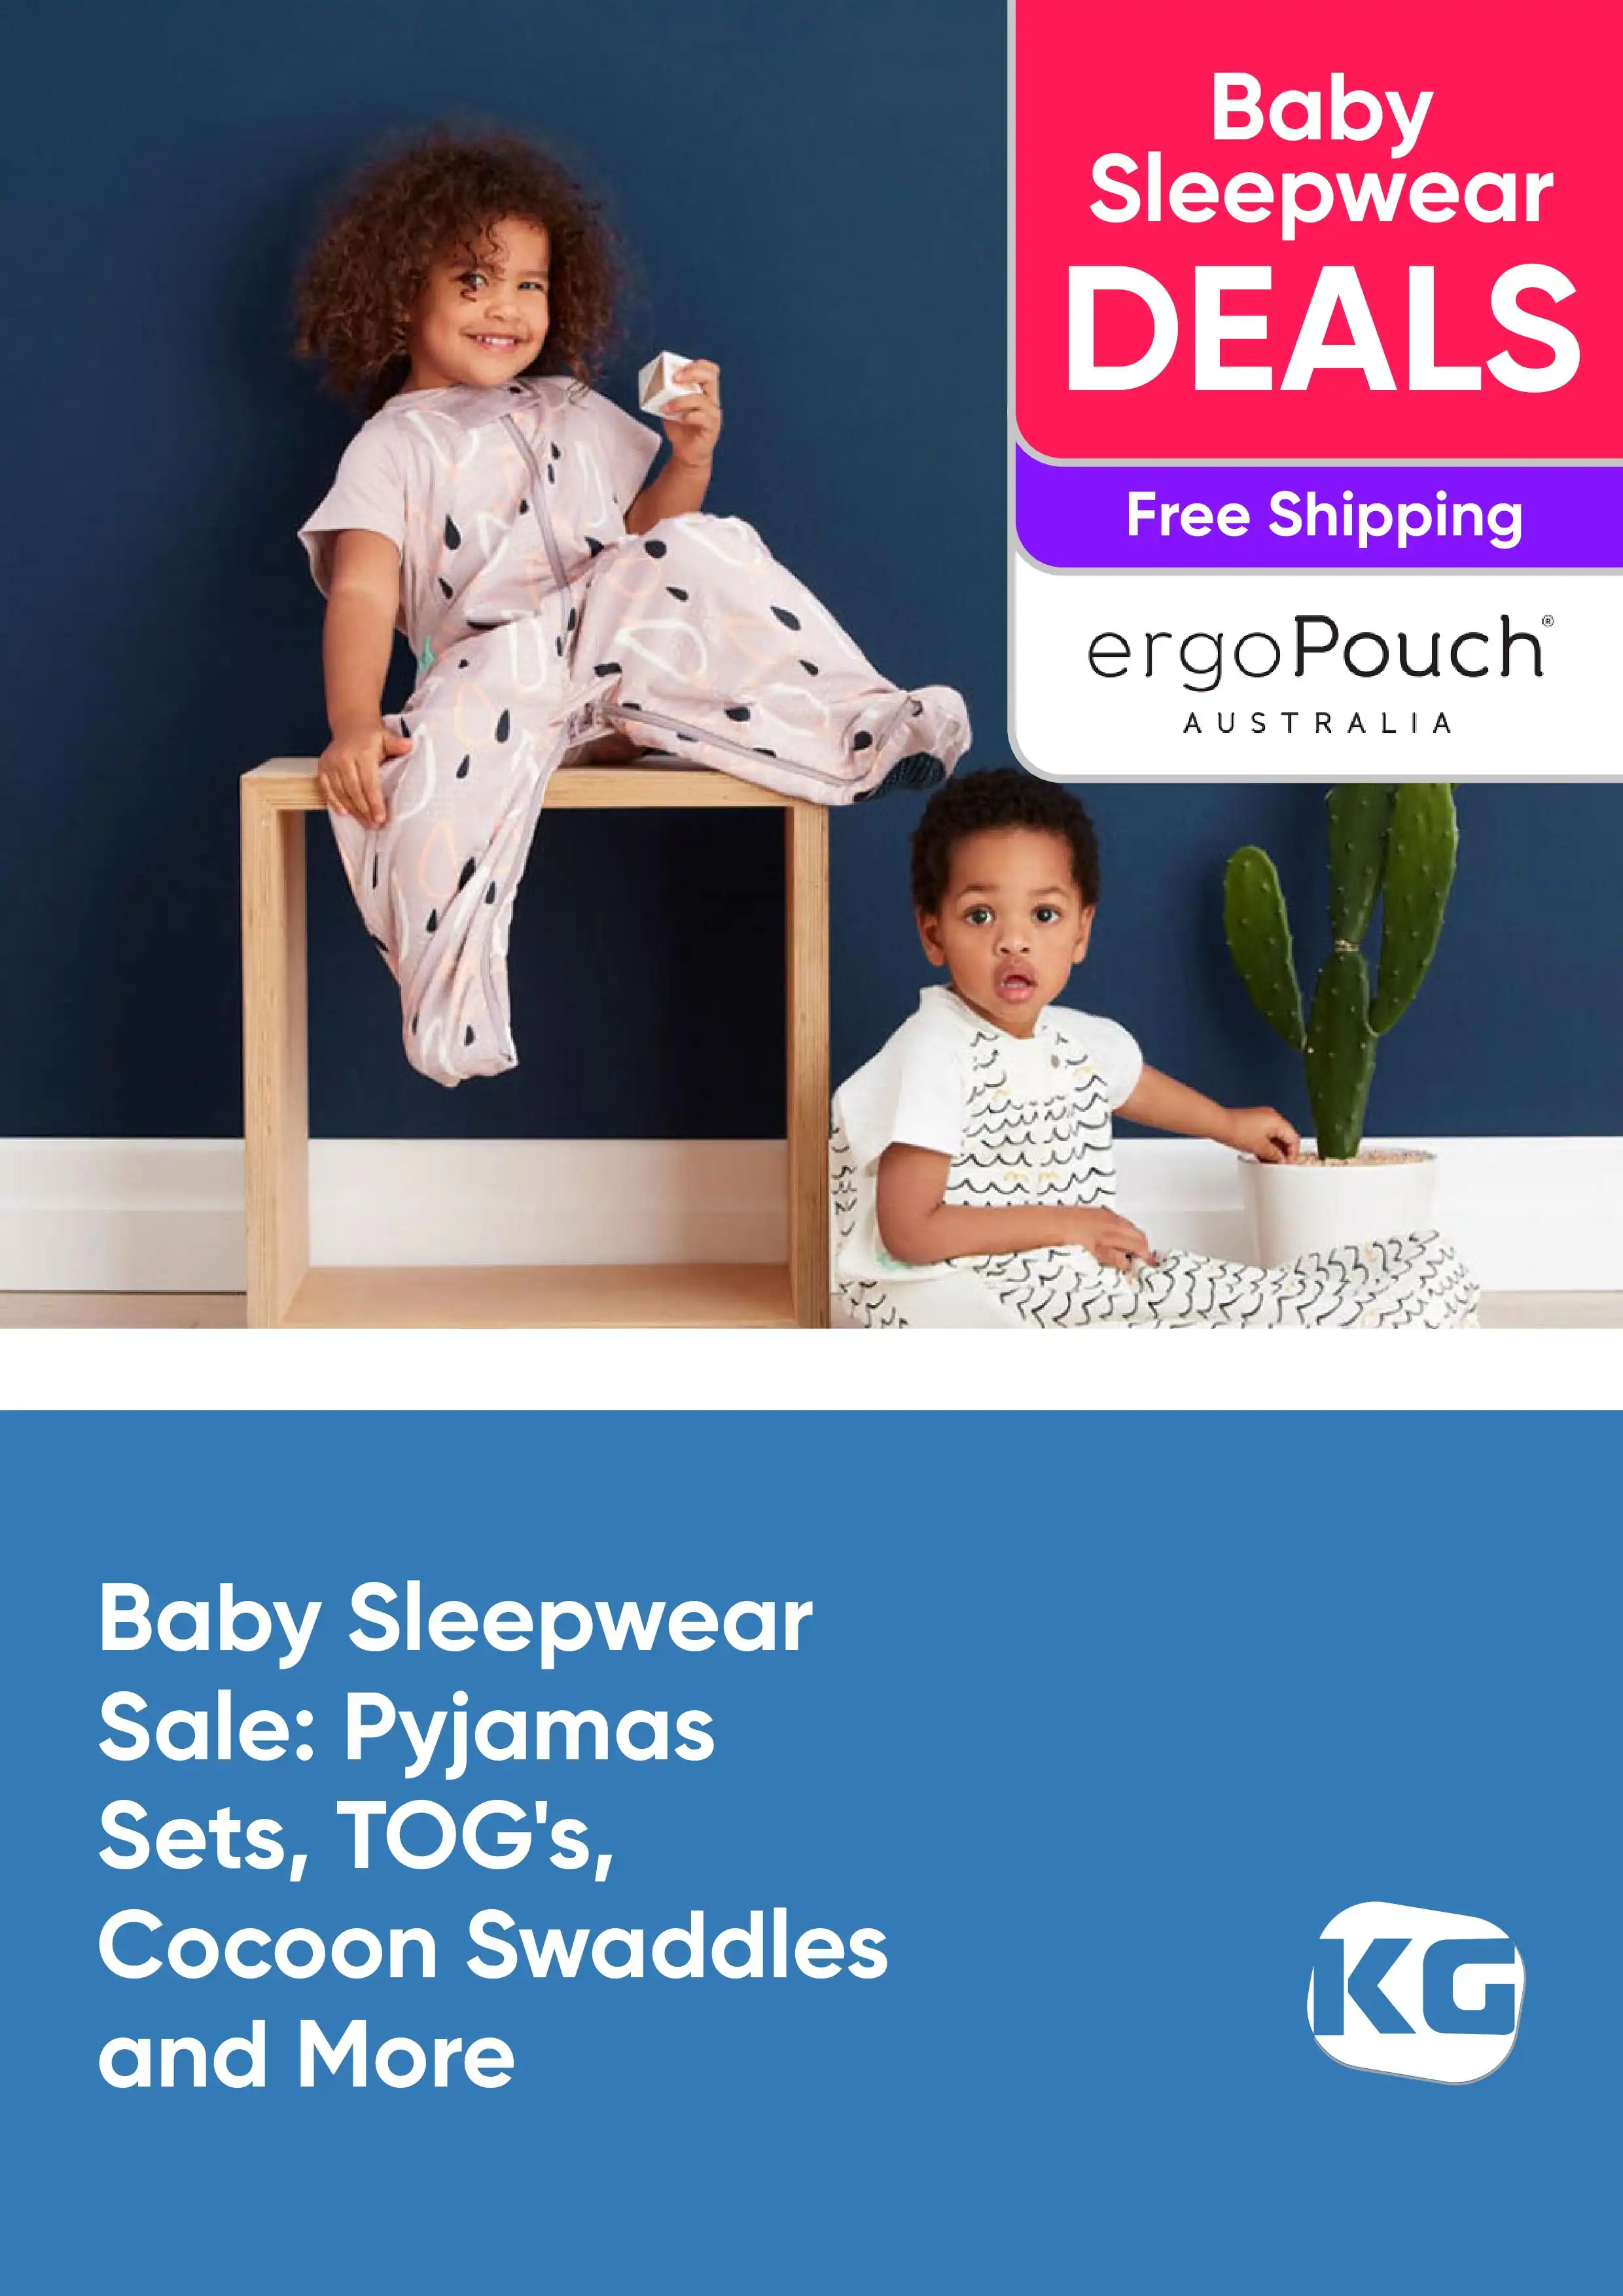 Baby Sleepwear Sale - Pyjamas Sets, TOG's, Cocoon Swaddles and More - ergoPouch